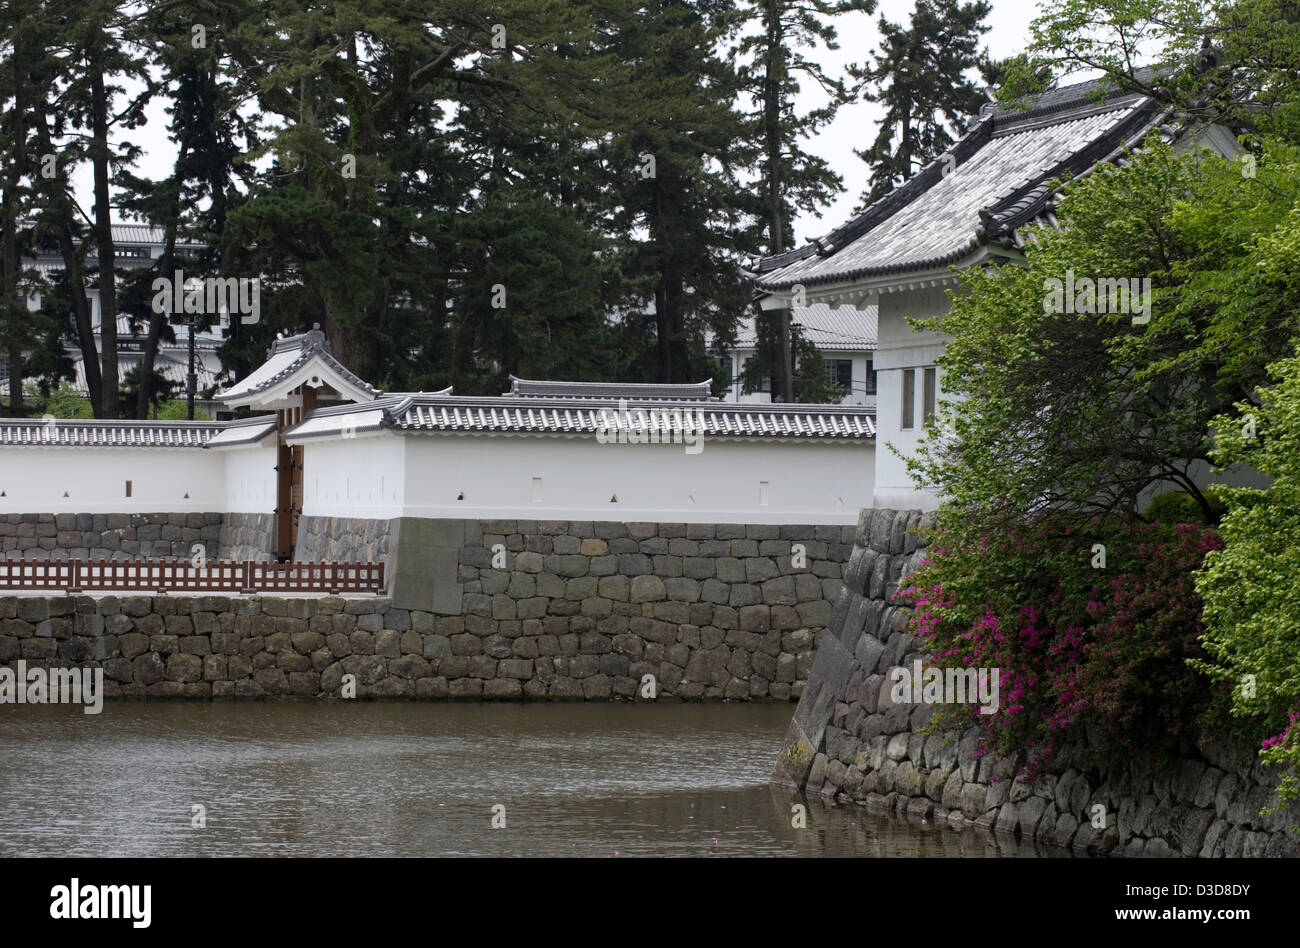 Historic wall, gate, moat and guard house of Odawara Castle, former stronghold of Doi Clan during Kamakura Period in Kanagawa. Stock Photo